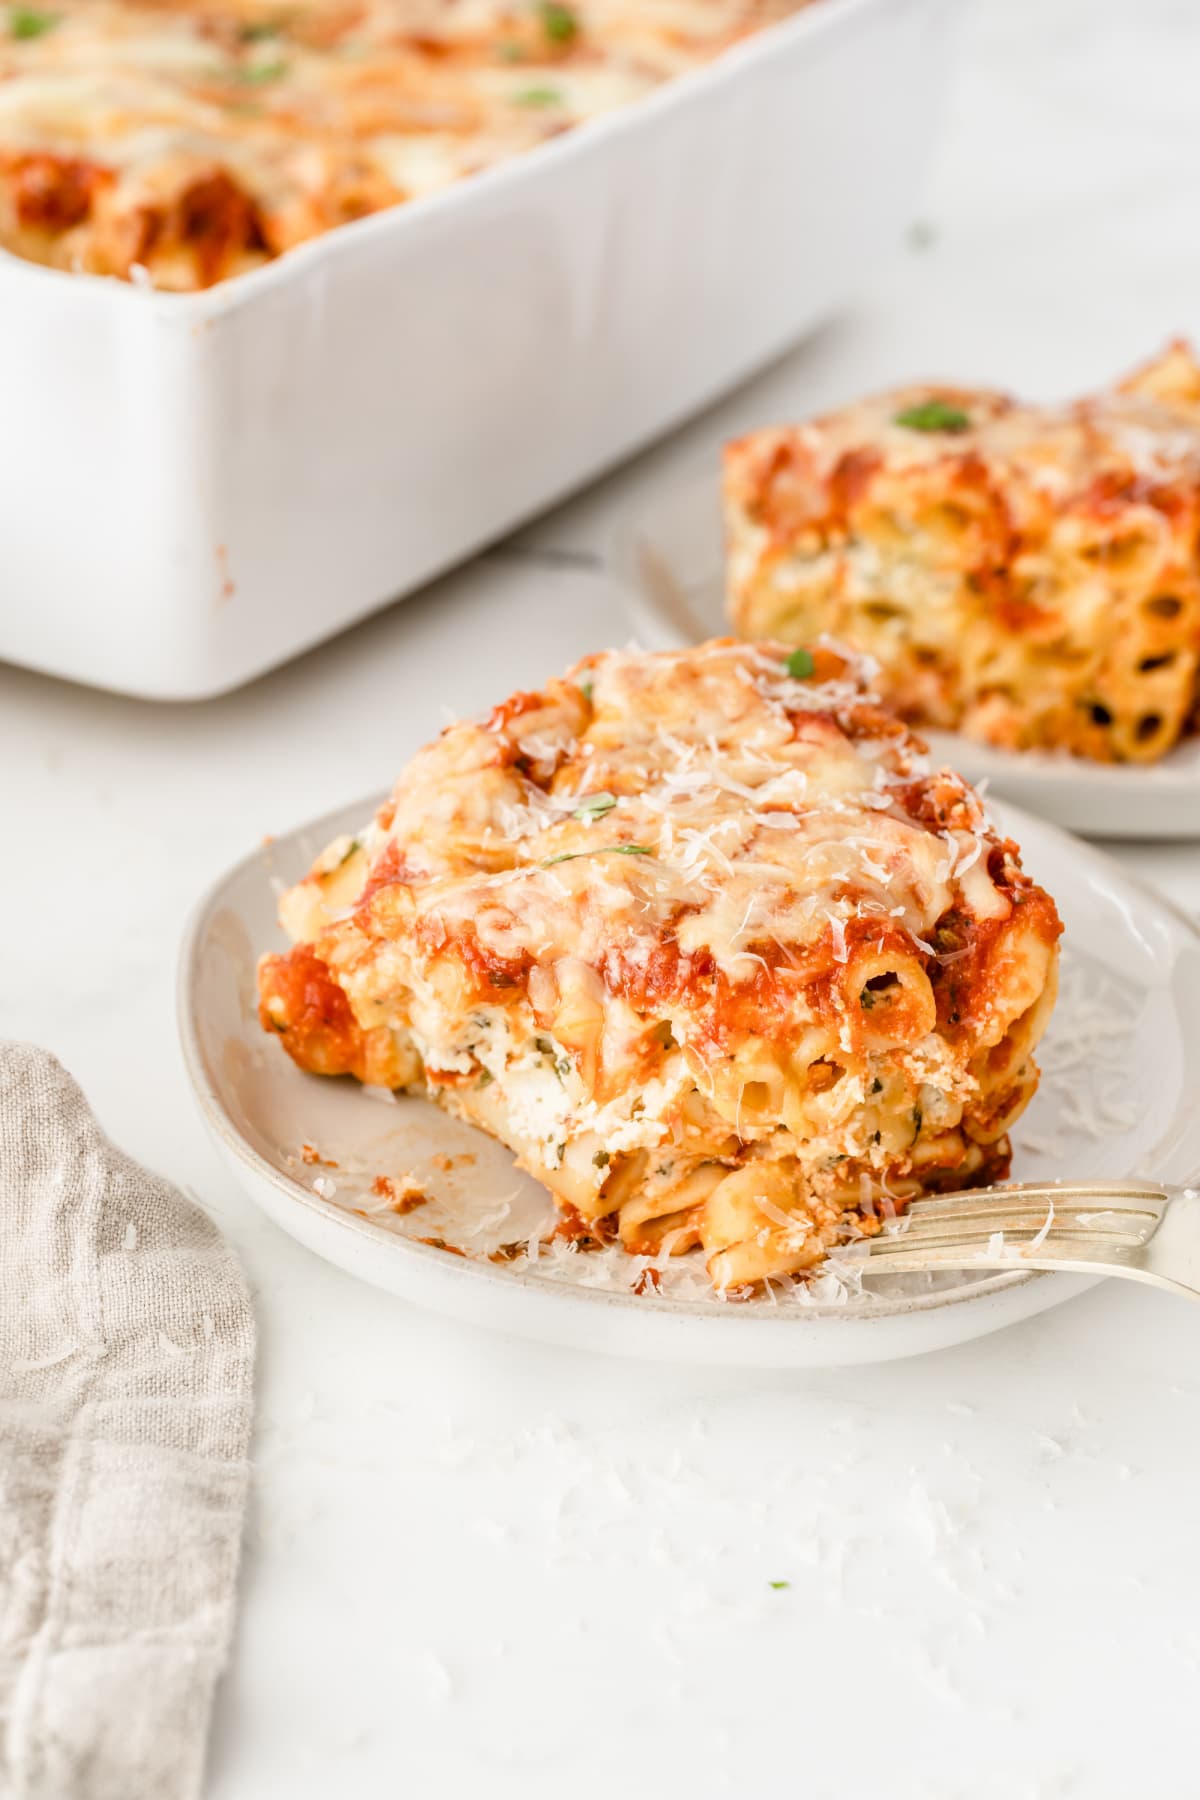 Baked ziti on plate with fork